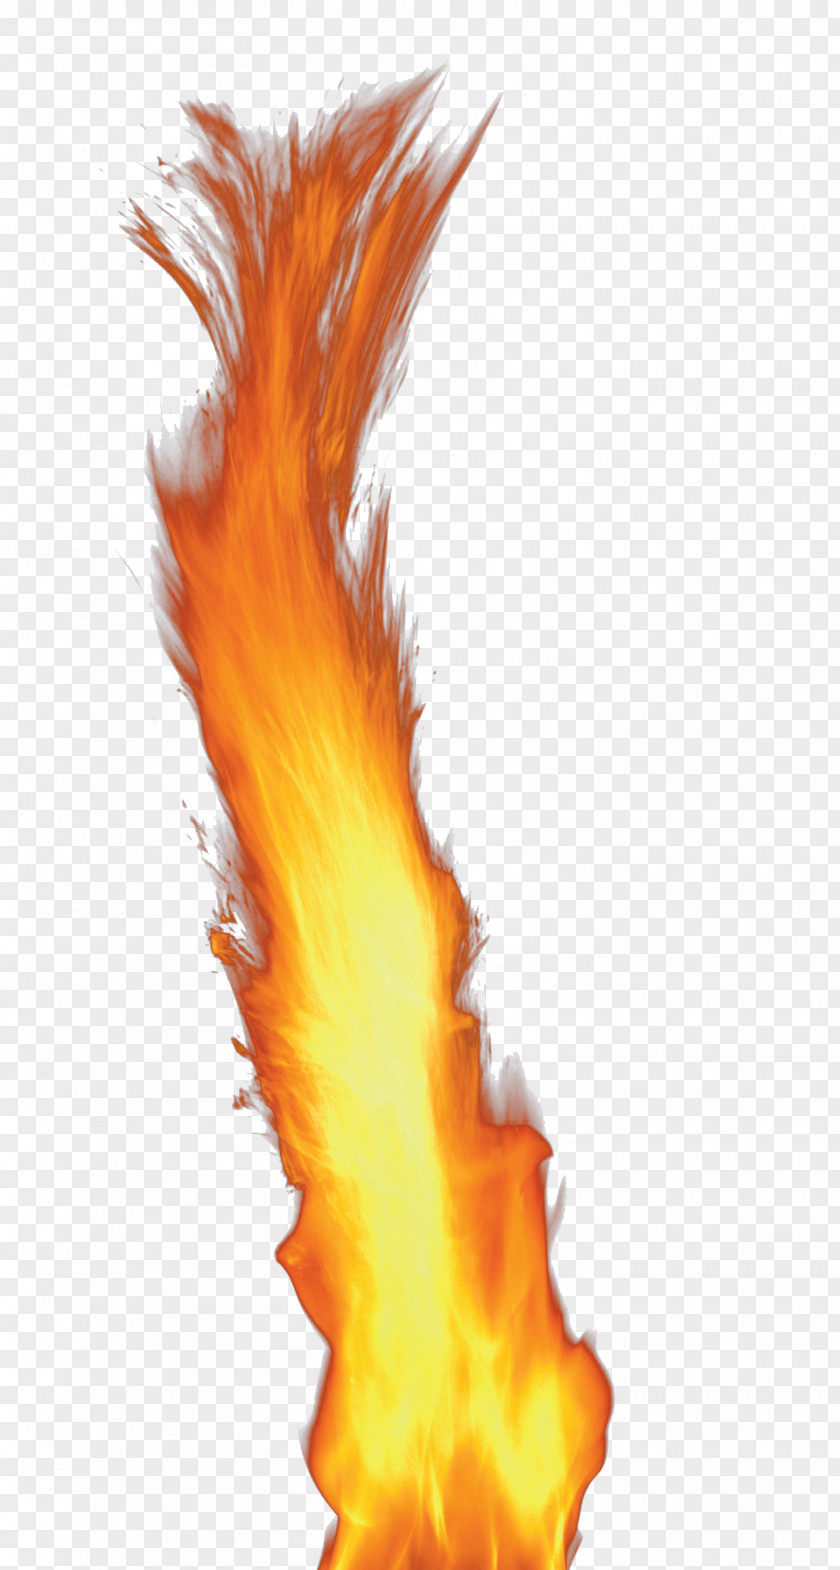 Fire Flame Image Clip Art PNG